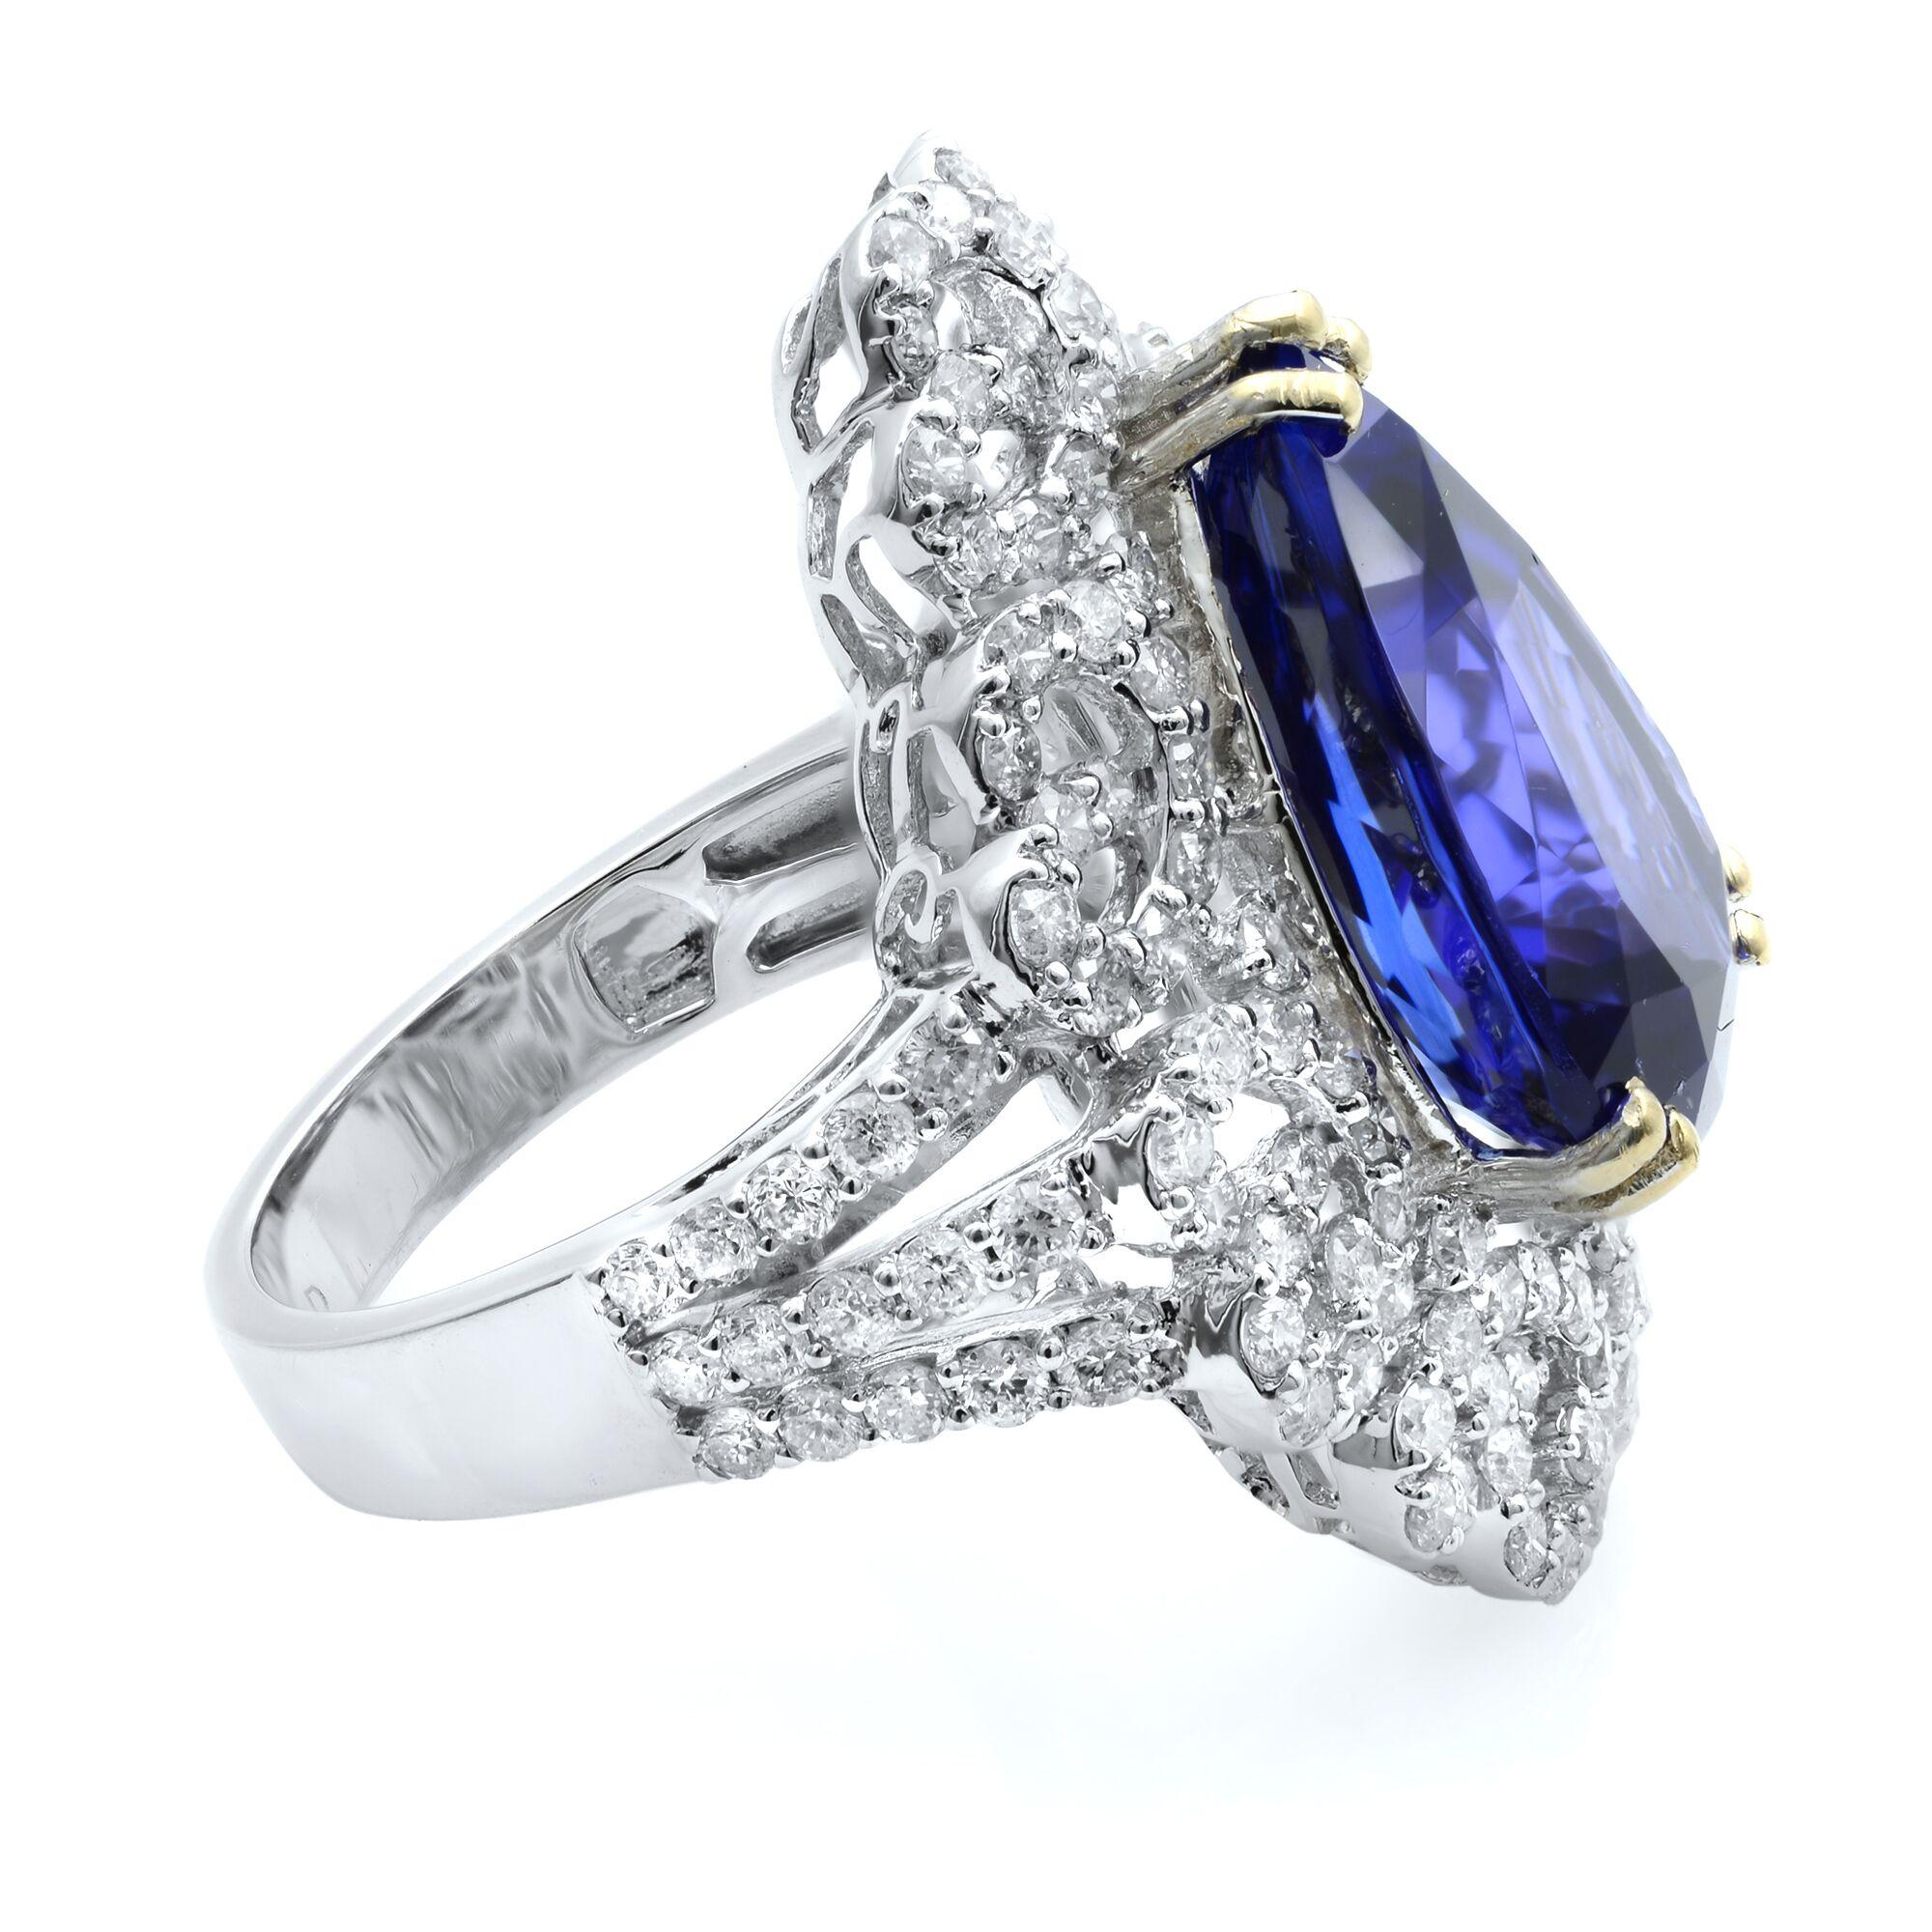 A large (8.20 carat) and luscious, vibrant ocean blue, faceted pear cut tanzanite glistens and glows from within a sizable sizzling whimsical halo composed of no less than 2.10 carats of bright white and sparkling round brilliant-cut diamonds.